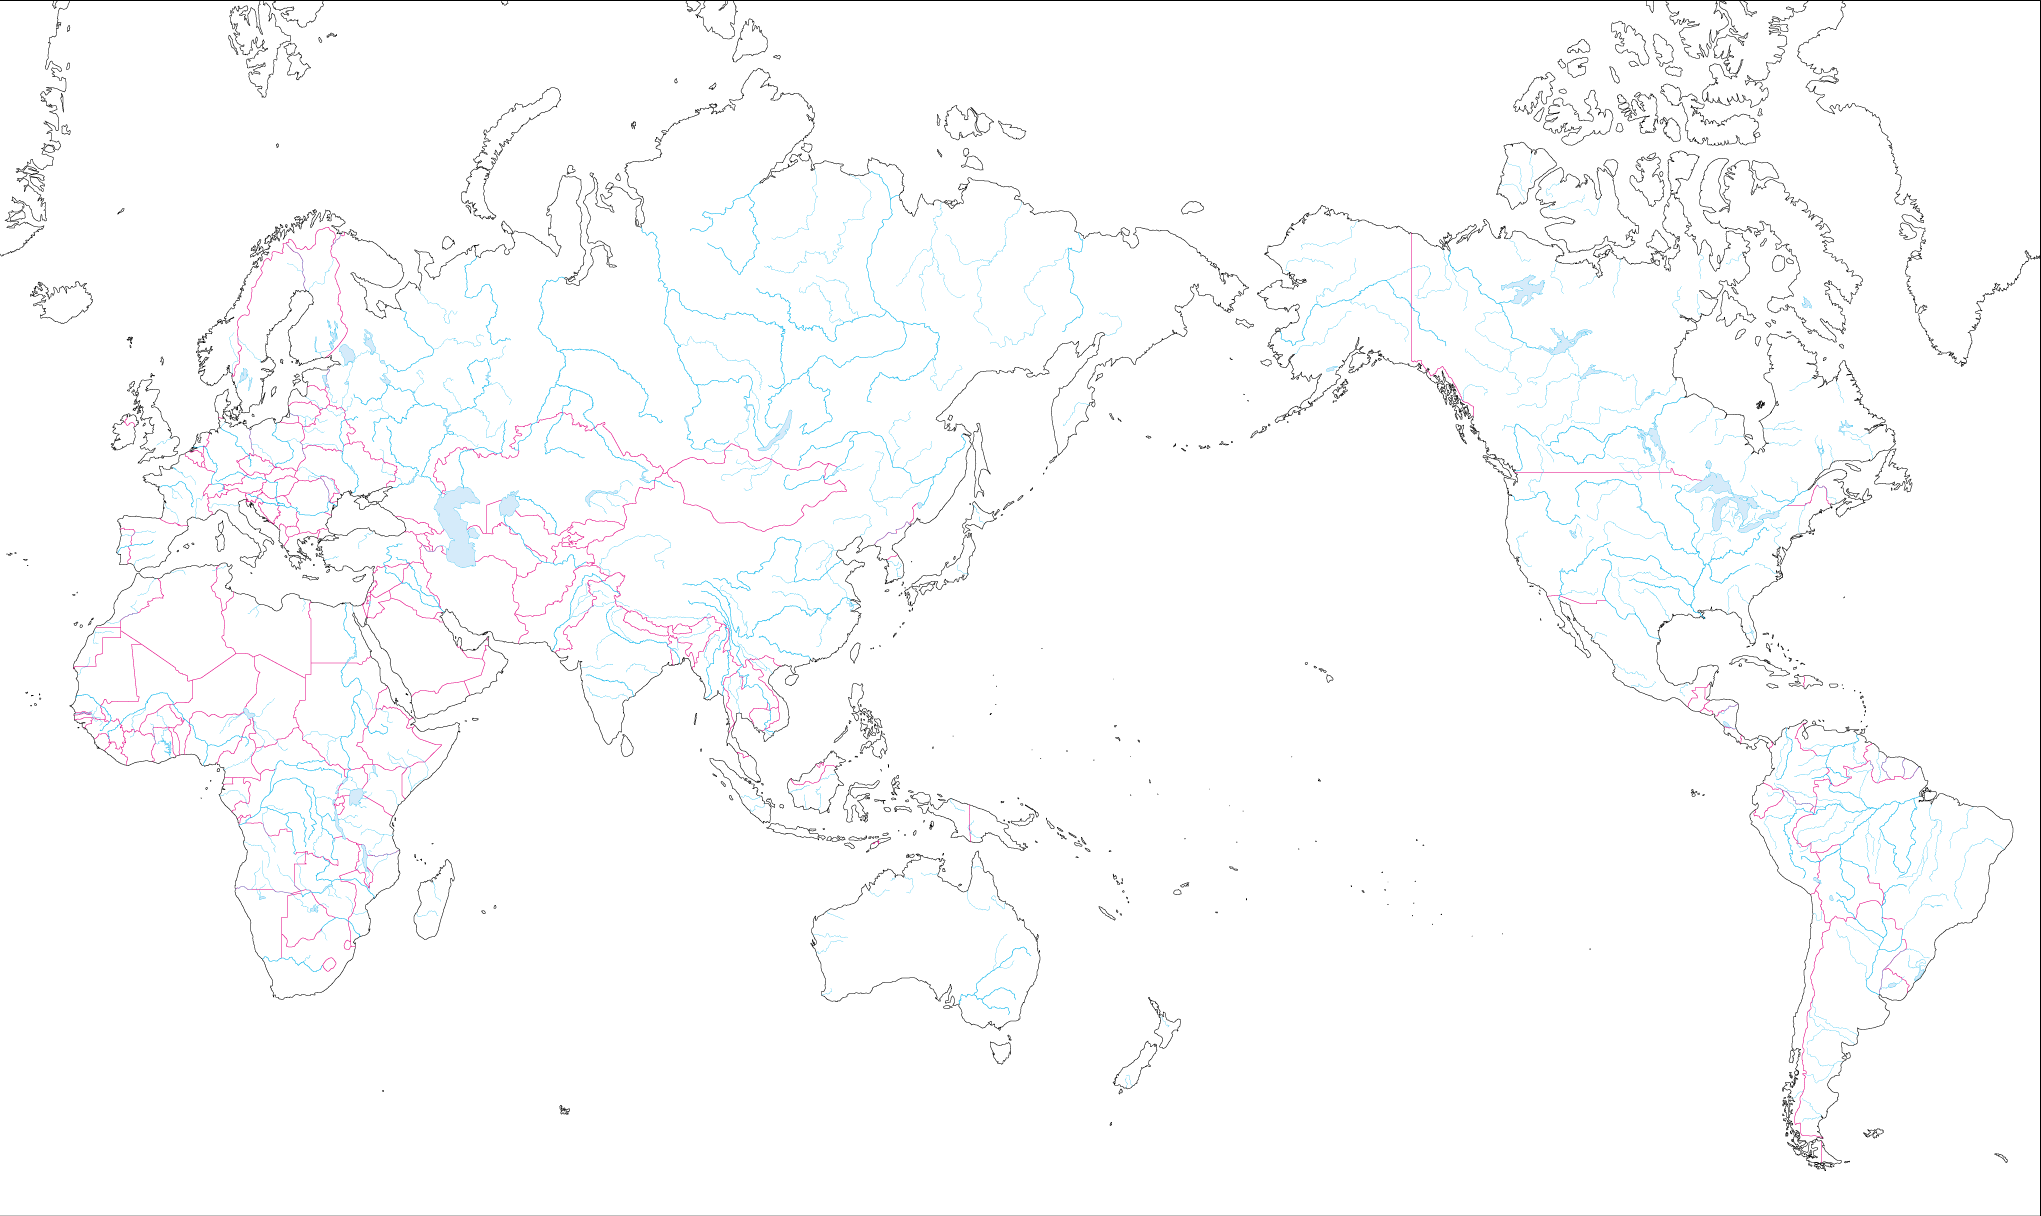 Miller projection - Asia center (With borders) image